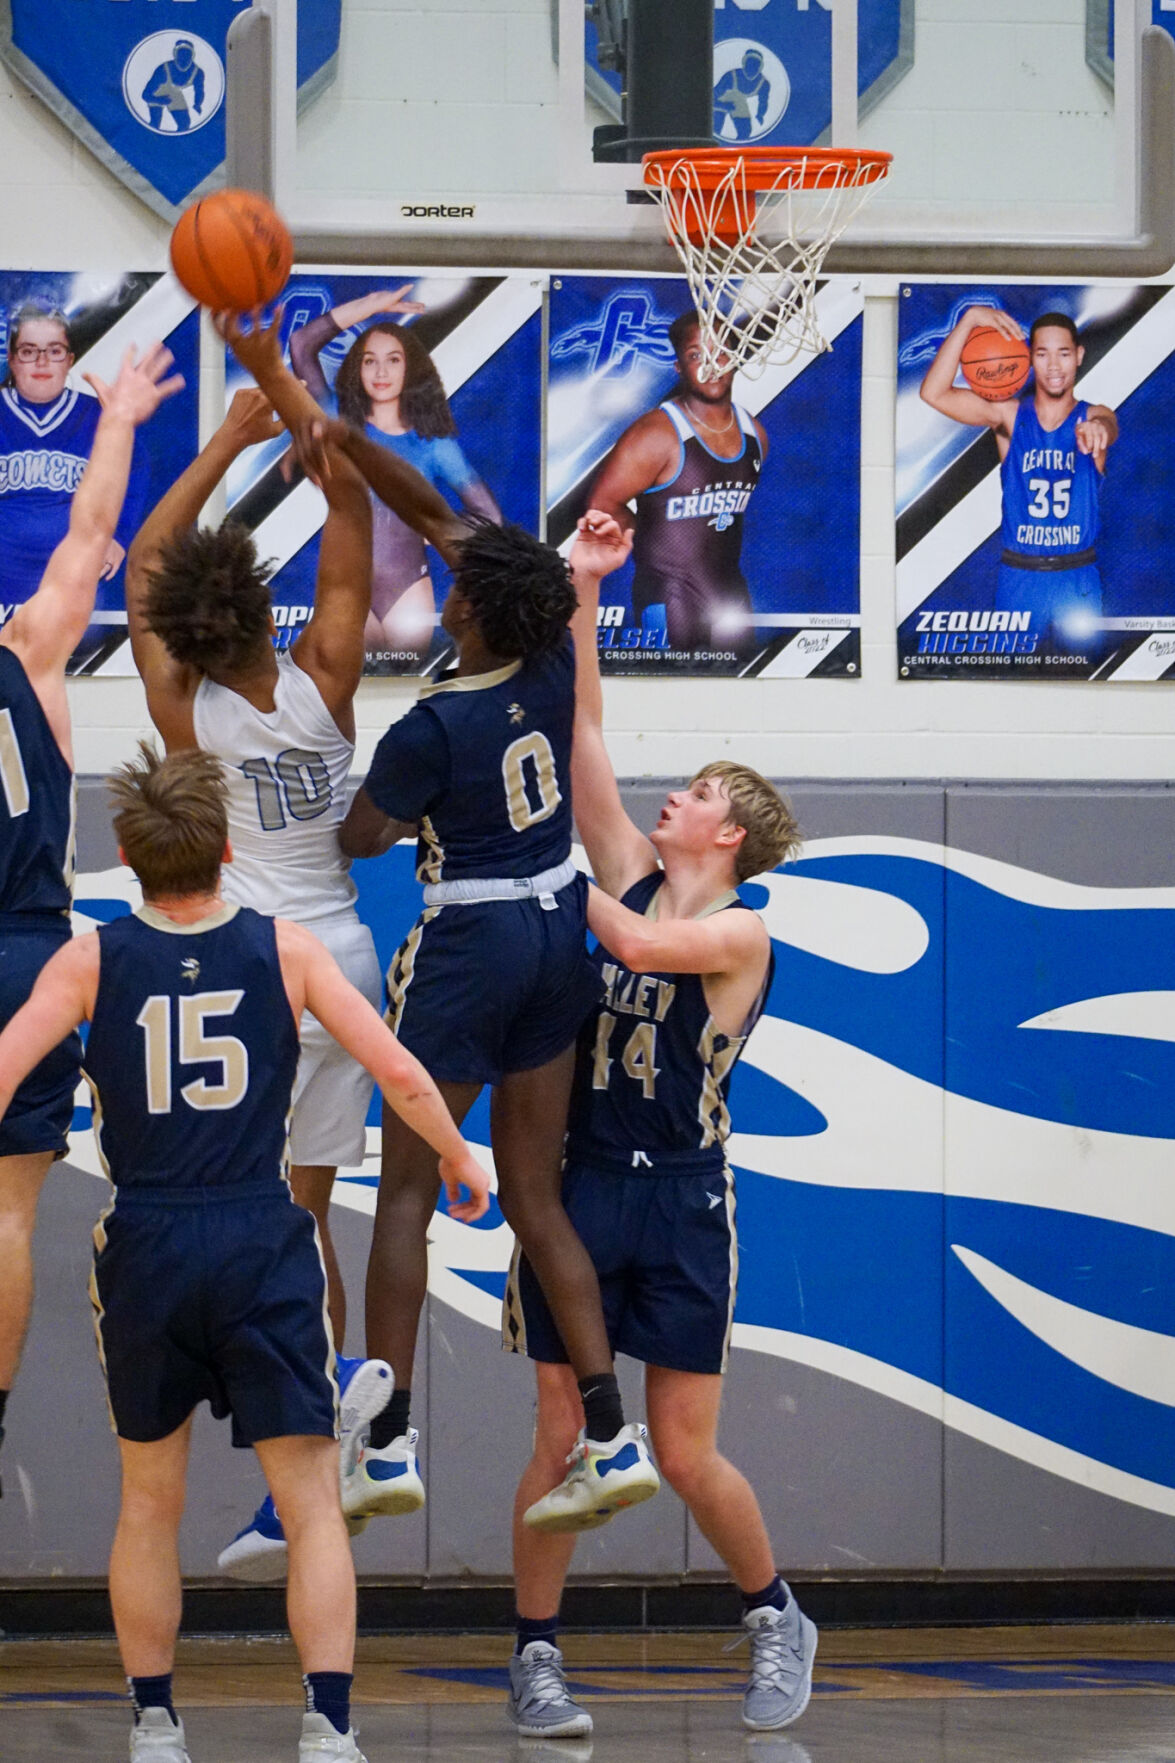 Teays Valley boys' basketball at Central Crossing: Dec. 21, 2021